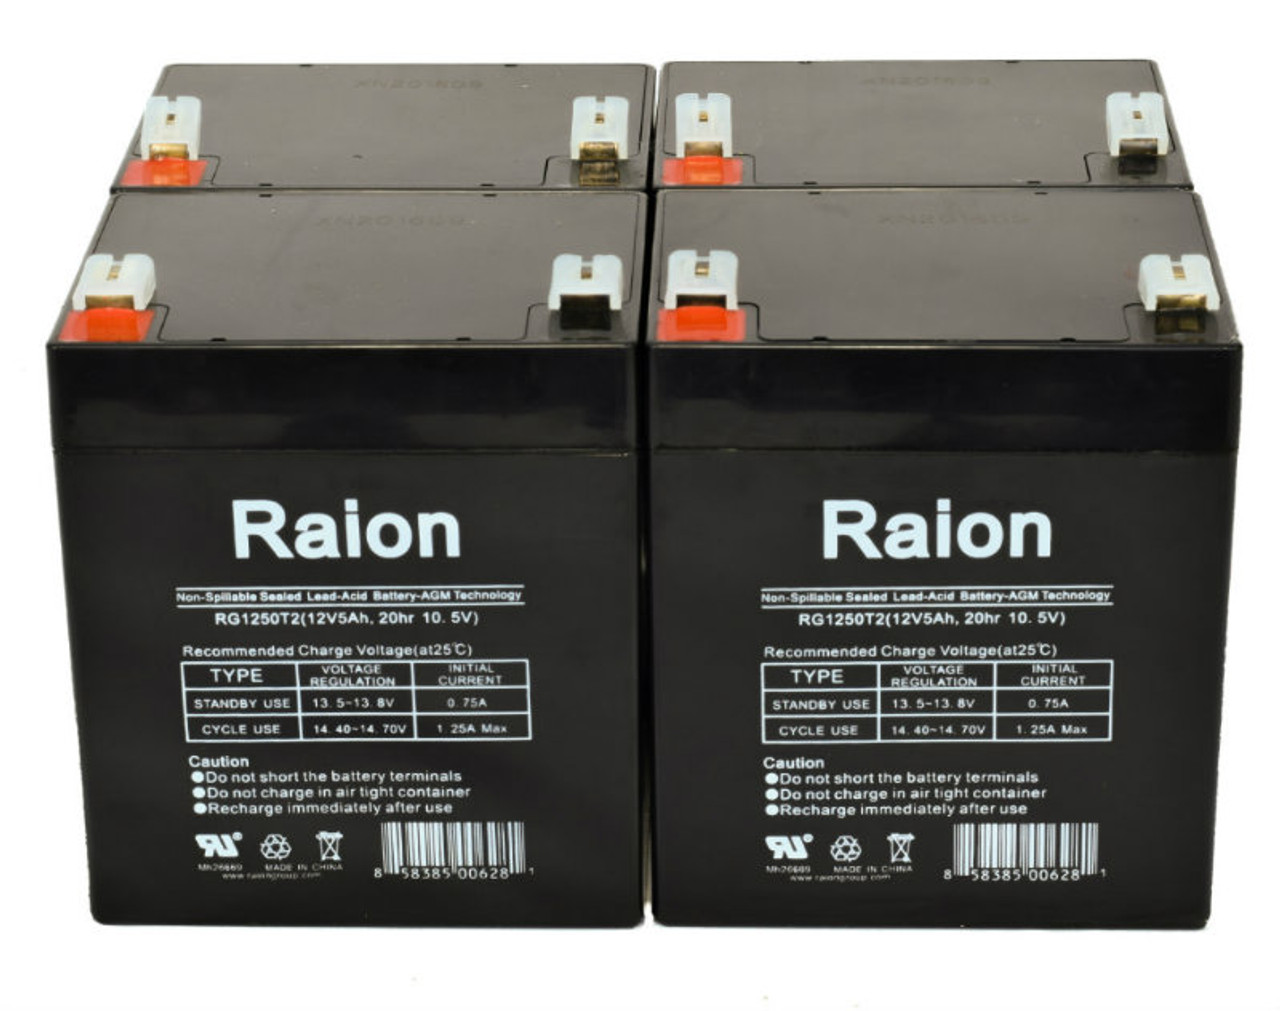 Raion Power 12V 5Ah RG1250T2 Replacement Lead Acid Battery for Mule PM1245 - 4 Pack